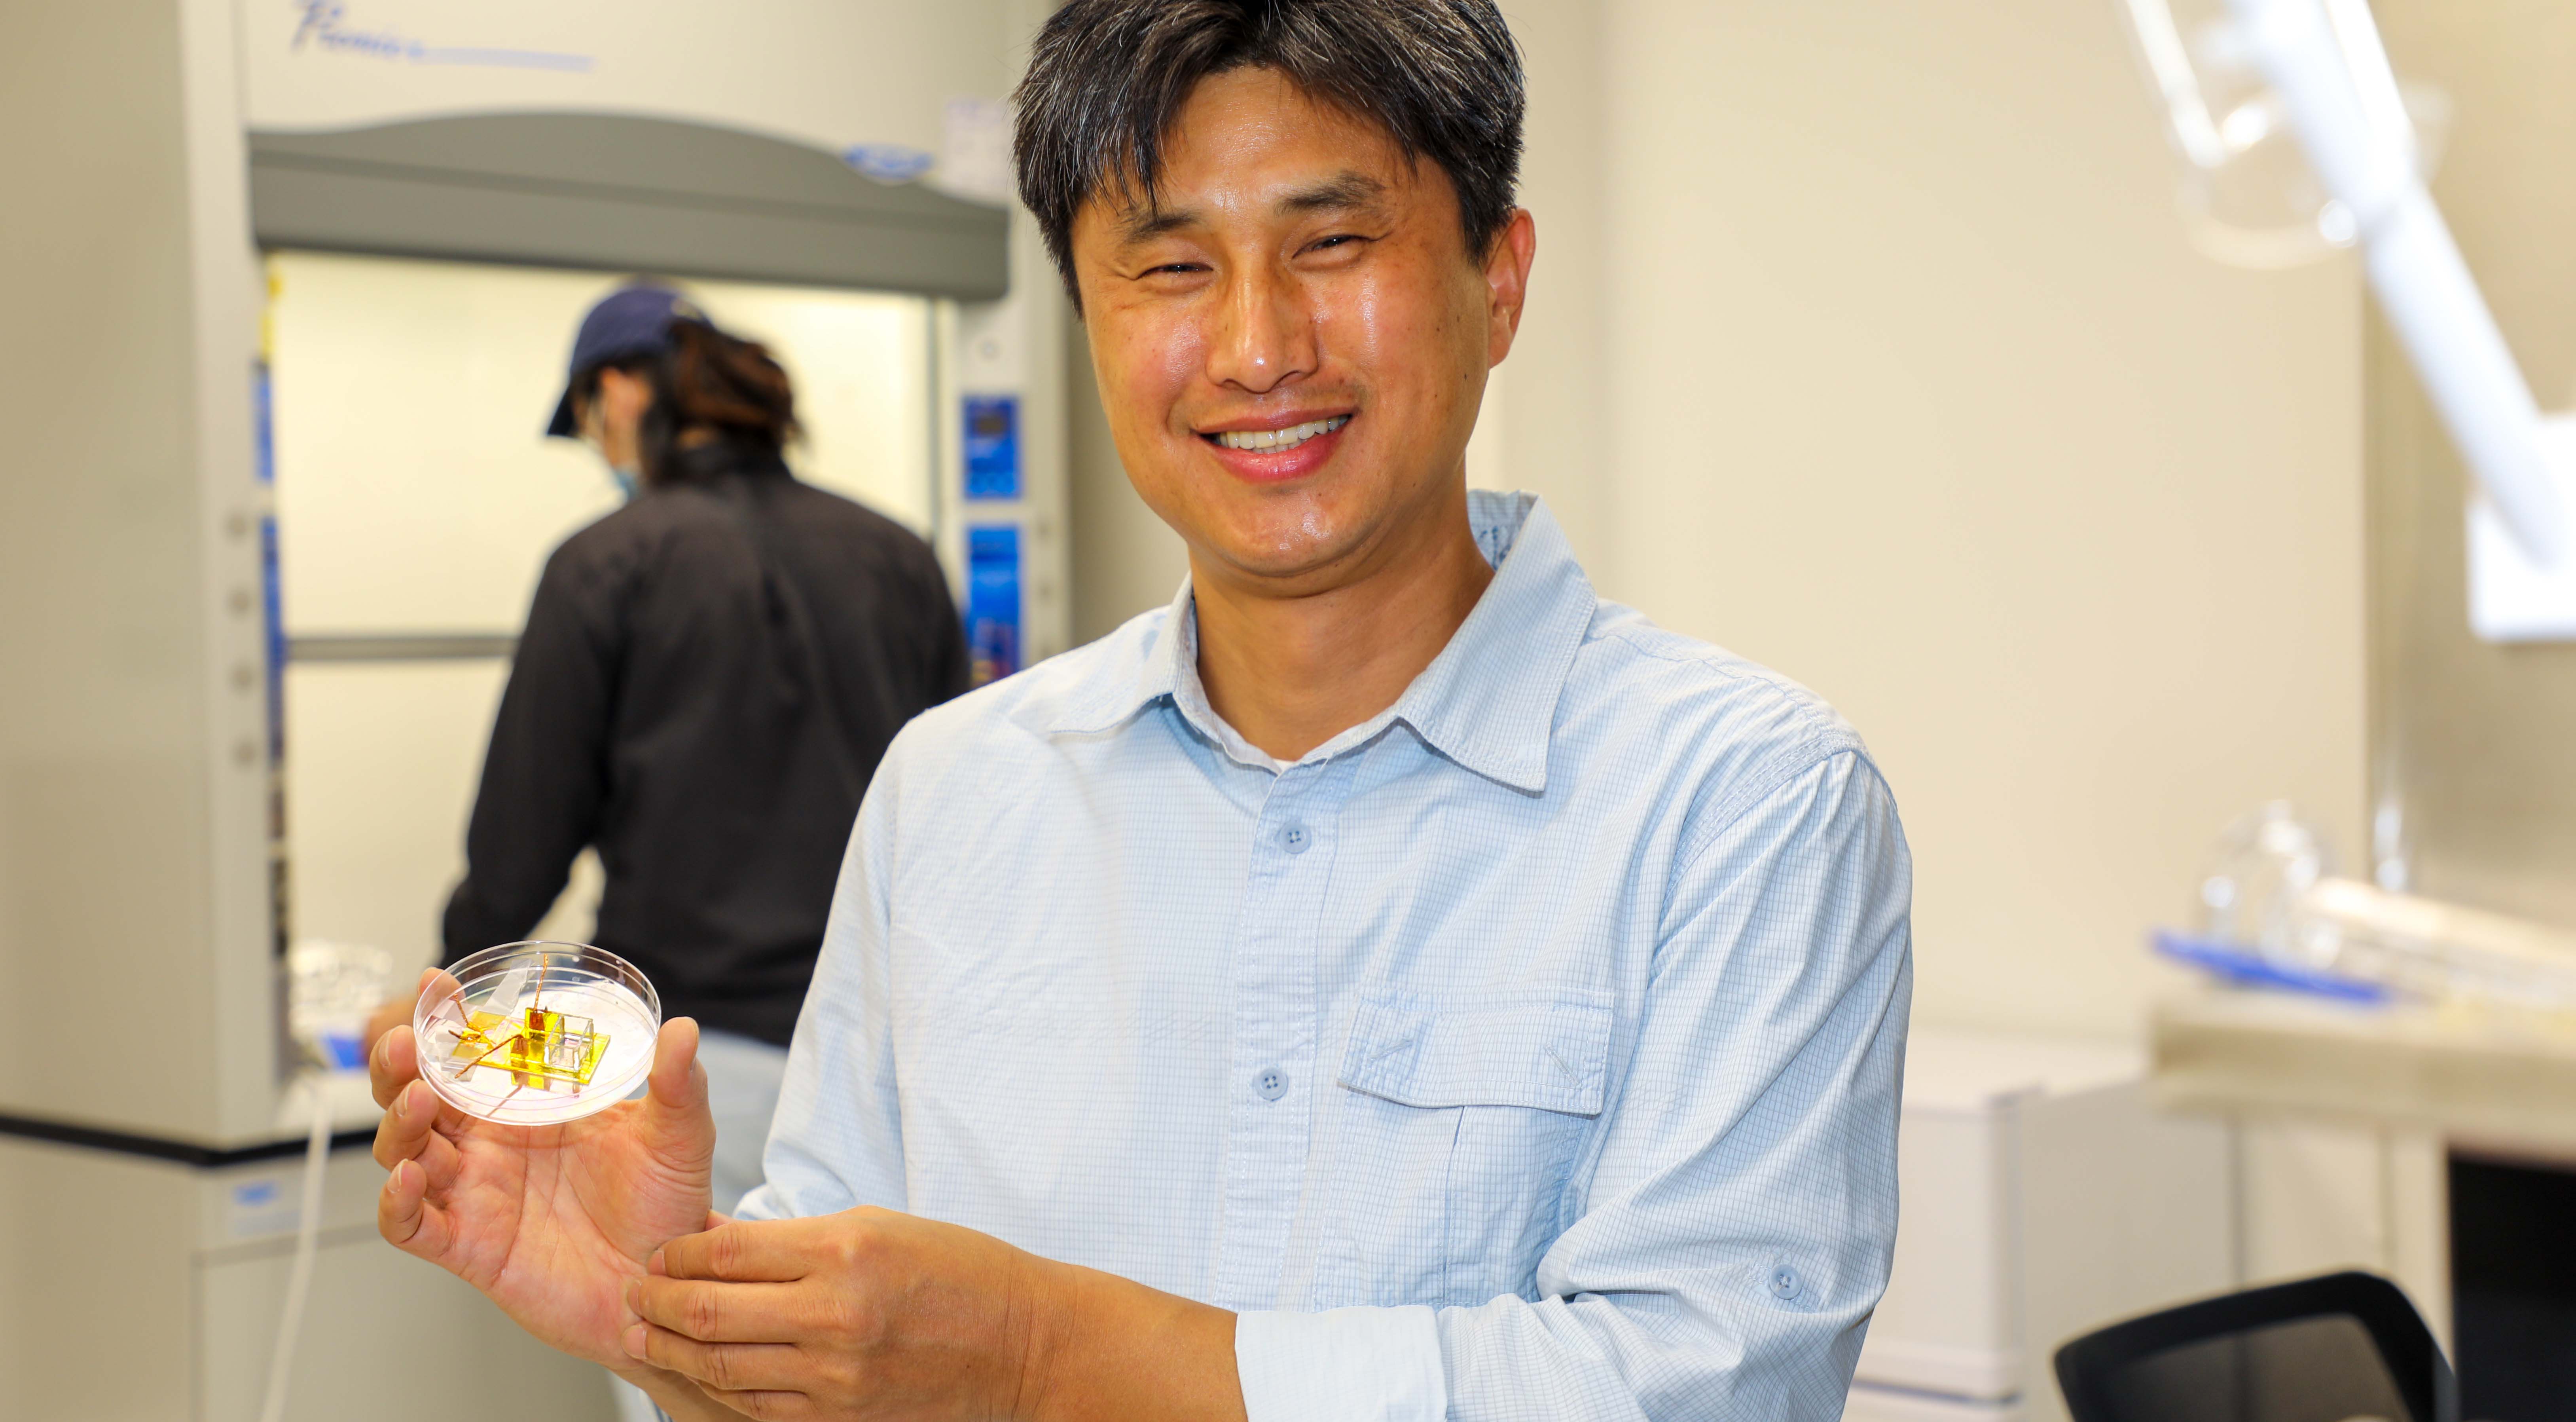 Sung-Yong (Sean) Park, in his Engineering lab, shows a petri dish containing his liquid prism, which controls the optofluidic process in his work. (Photo: Scott Hargrove)